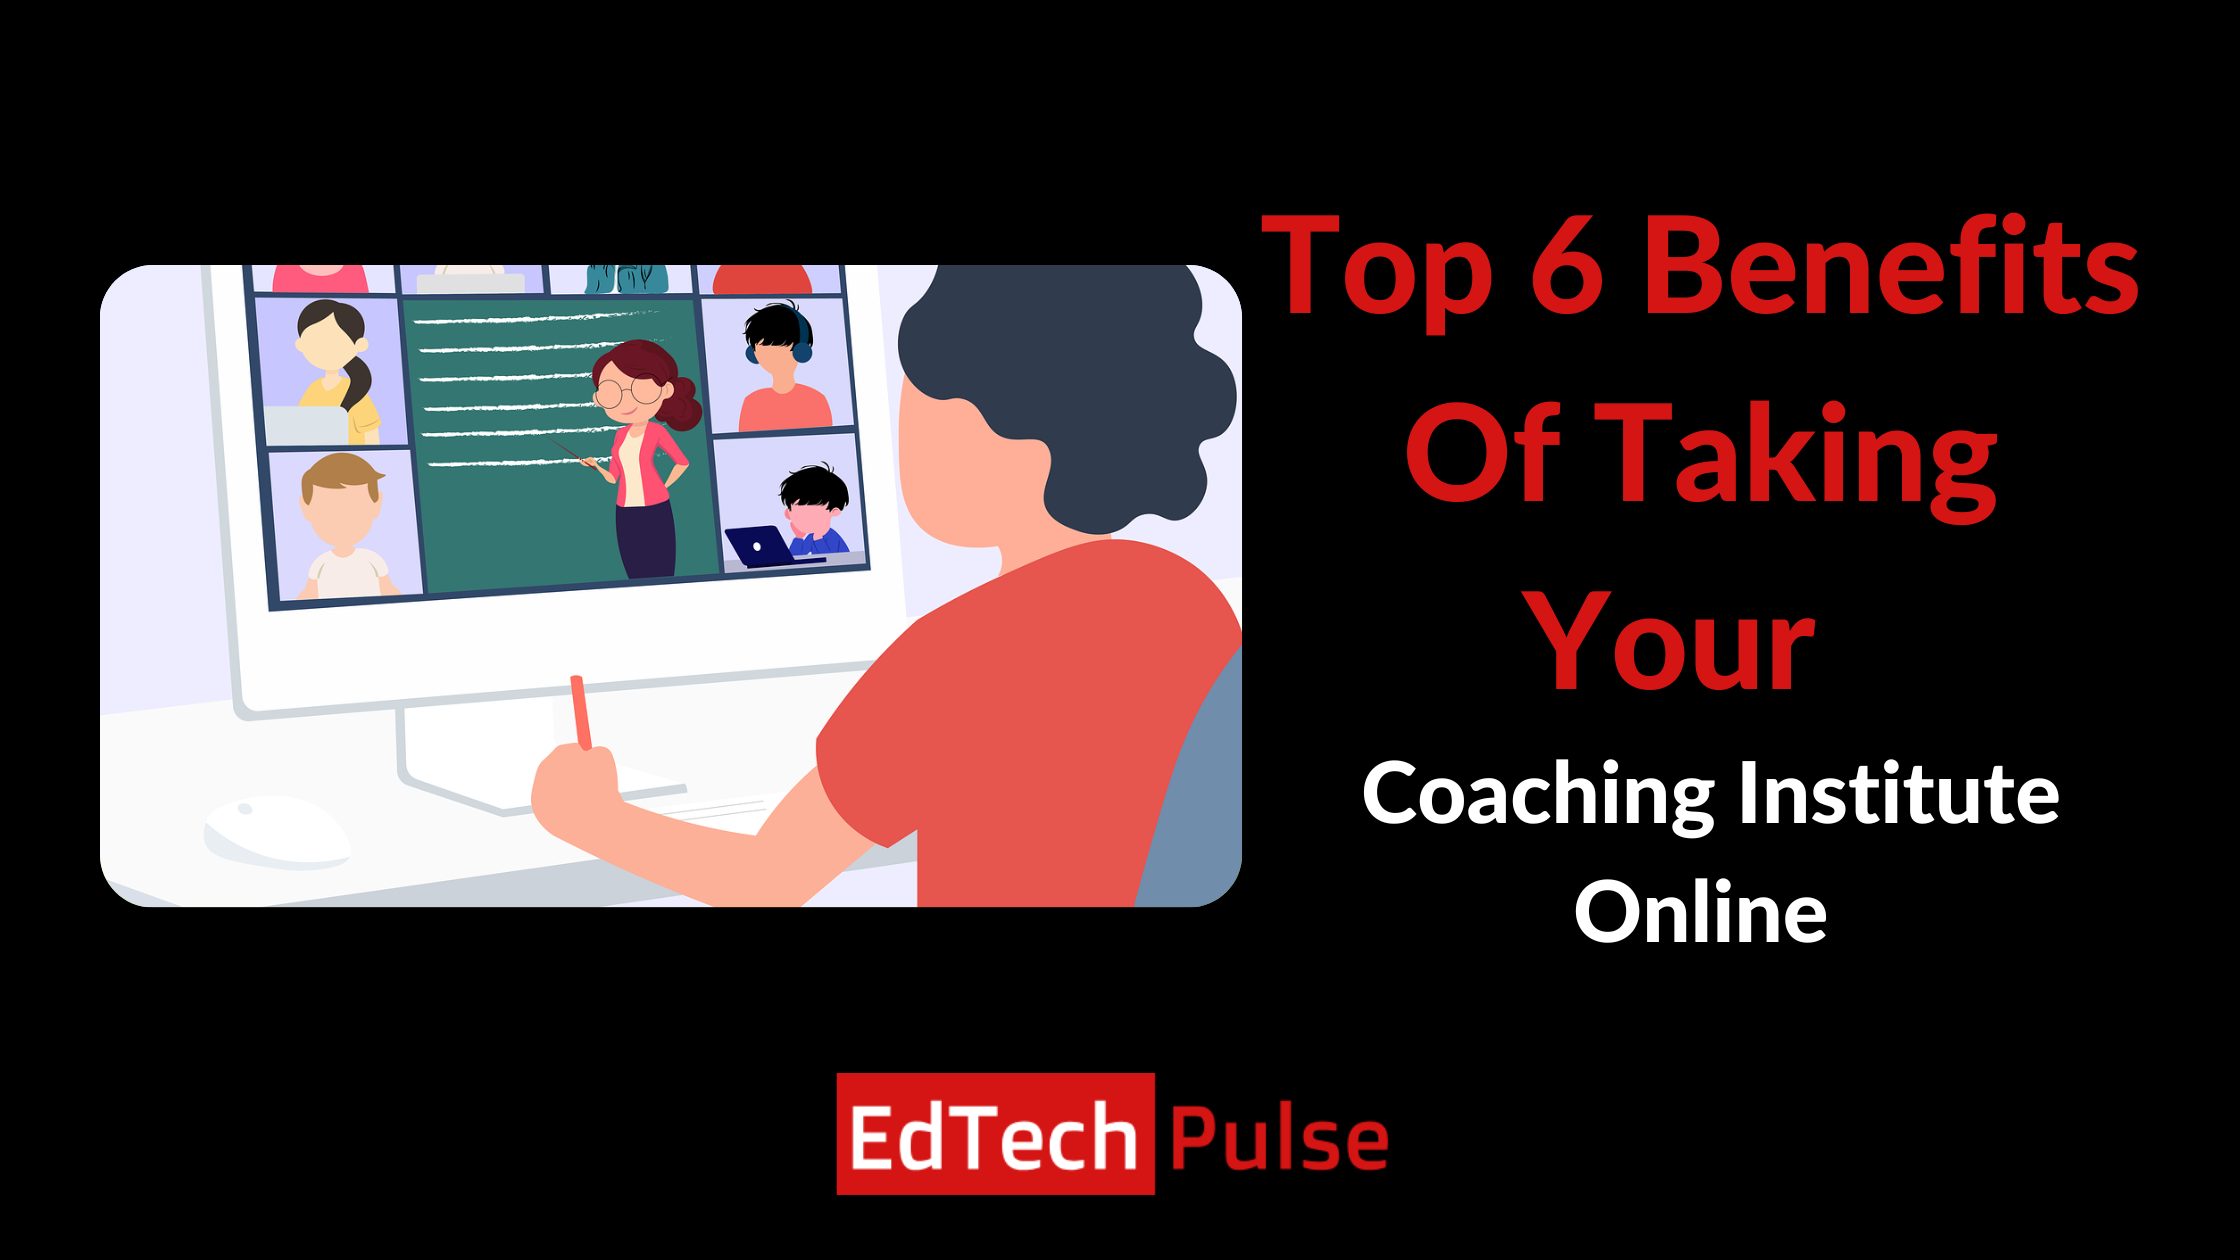 Top 6 Benefits Of Taking Your Coaching Institute Online